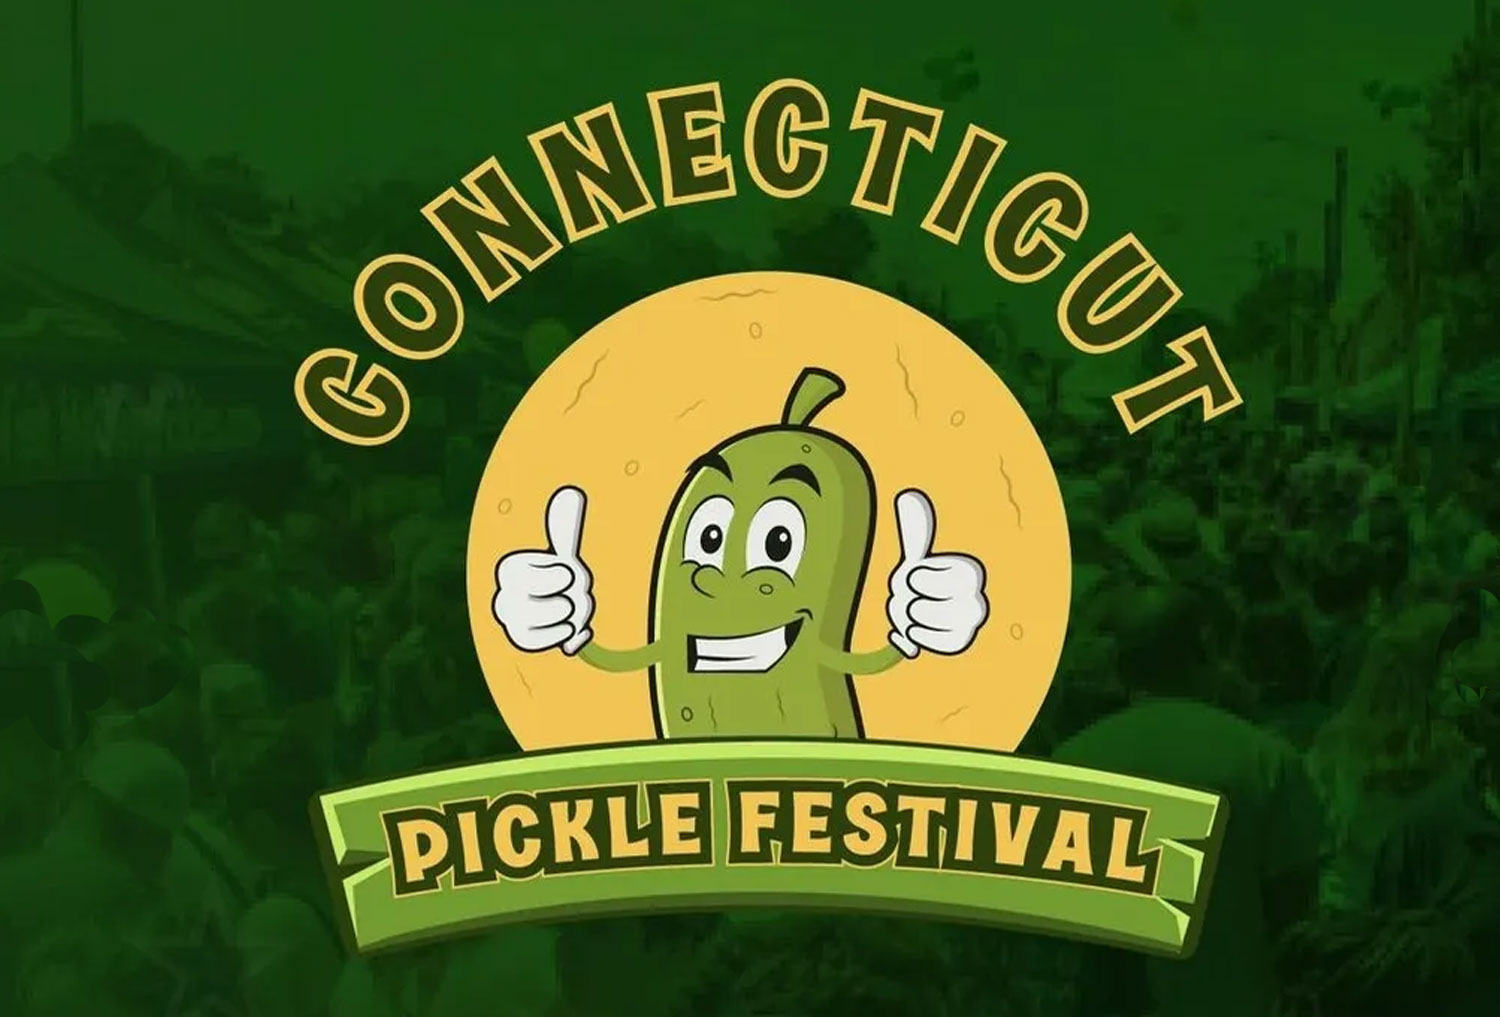 The Connecticut Pickle Fest at the Berlin Fairgrounds